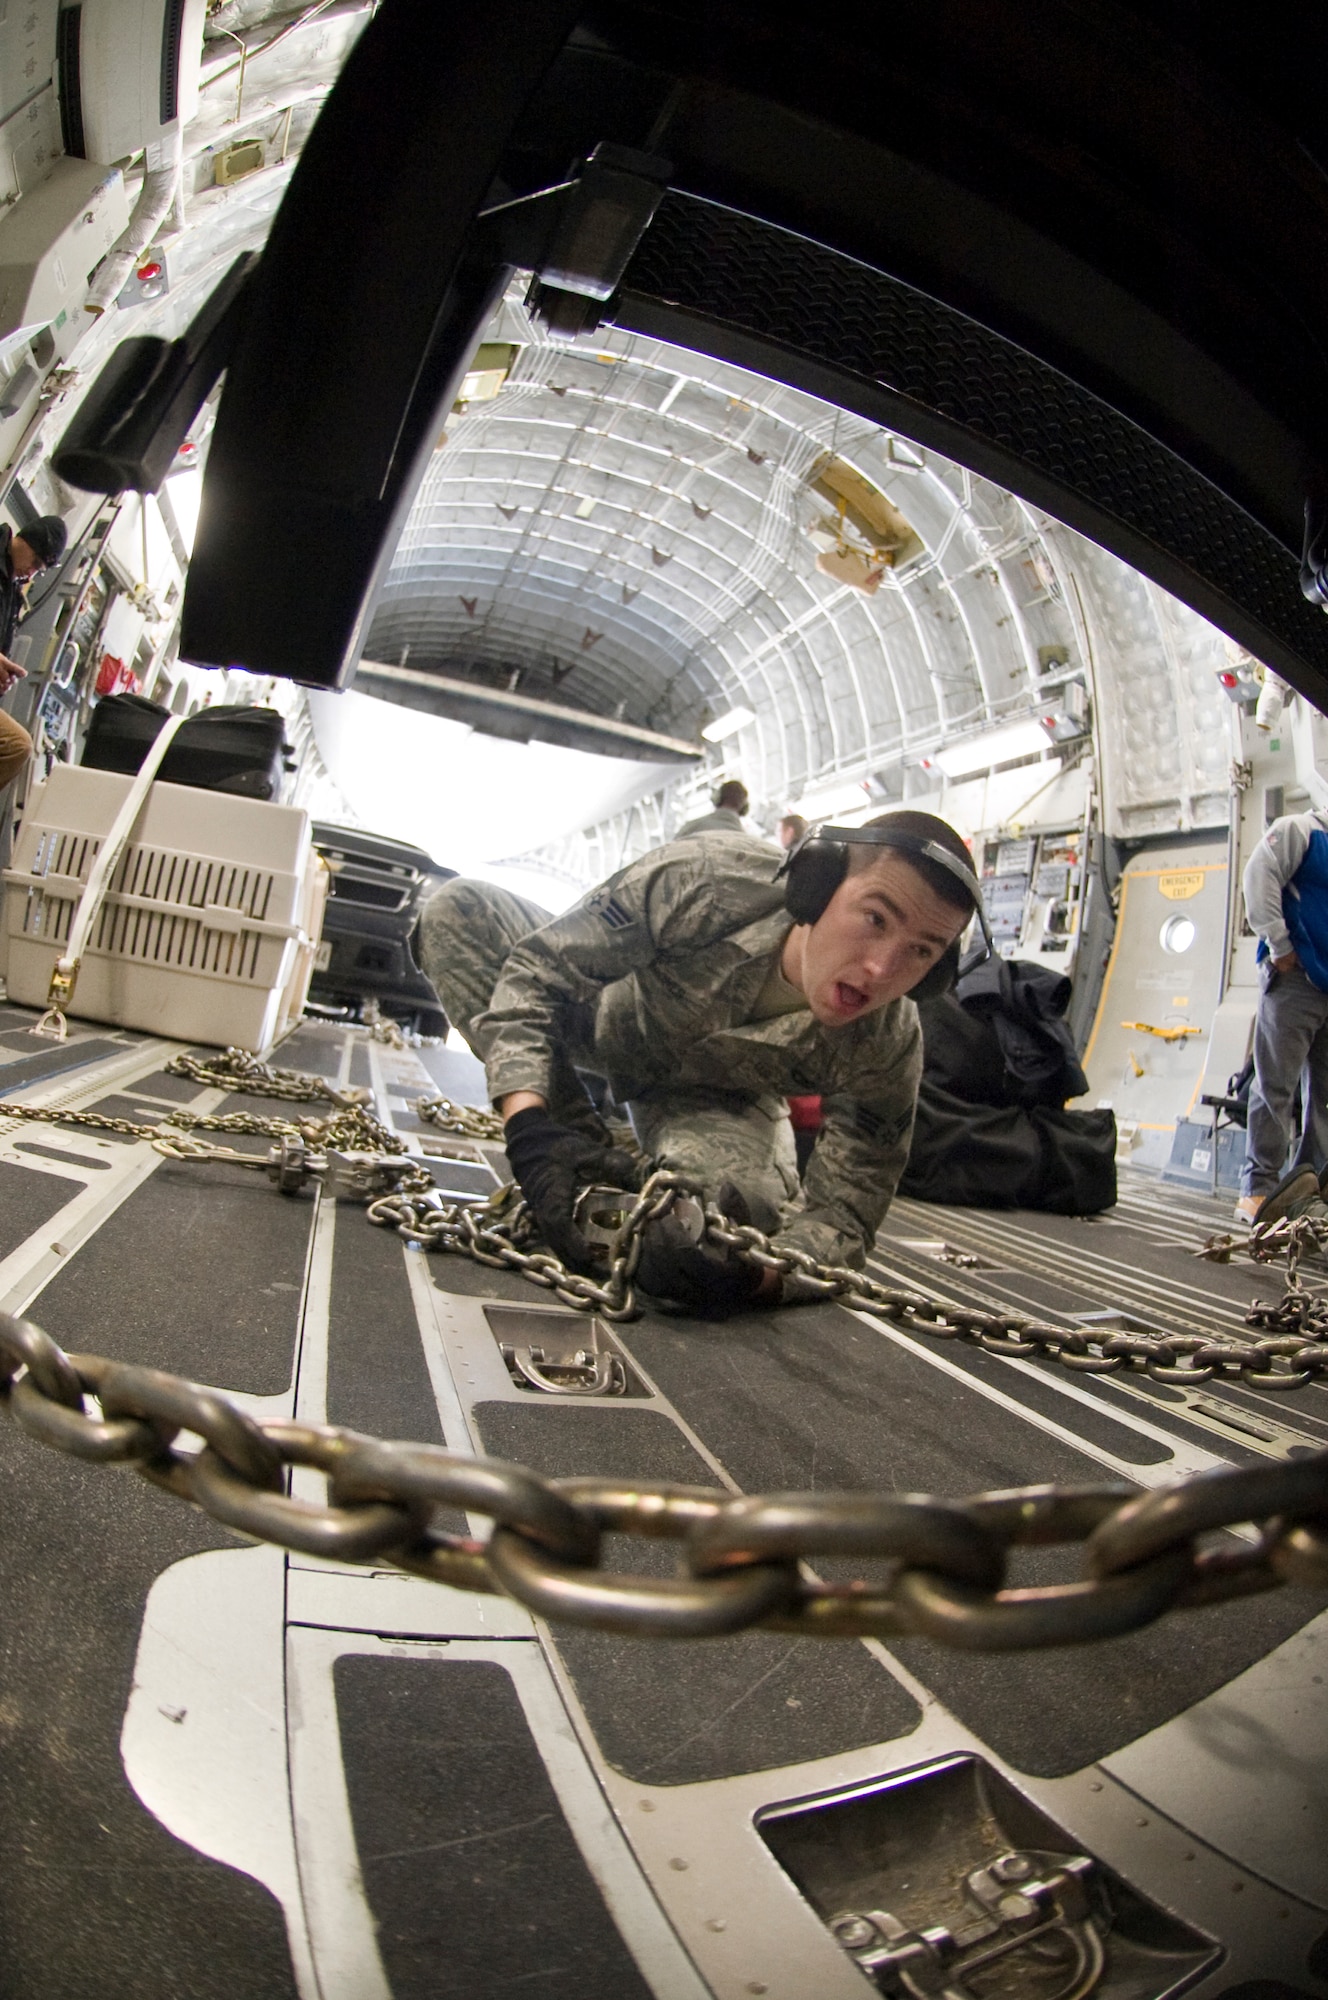 Senior Airman Michael Oniones, 89th Aerial Port Squadron aircraft services specialist, tightens down an MB-1 chain device to secure a government vehicle inside a C-17 aircraft during a presidential-level mission here Jan. 25. (Photo/Bobby Jones)